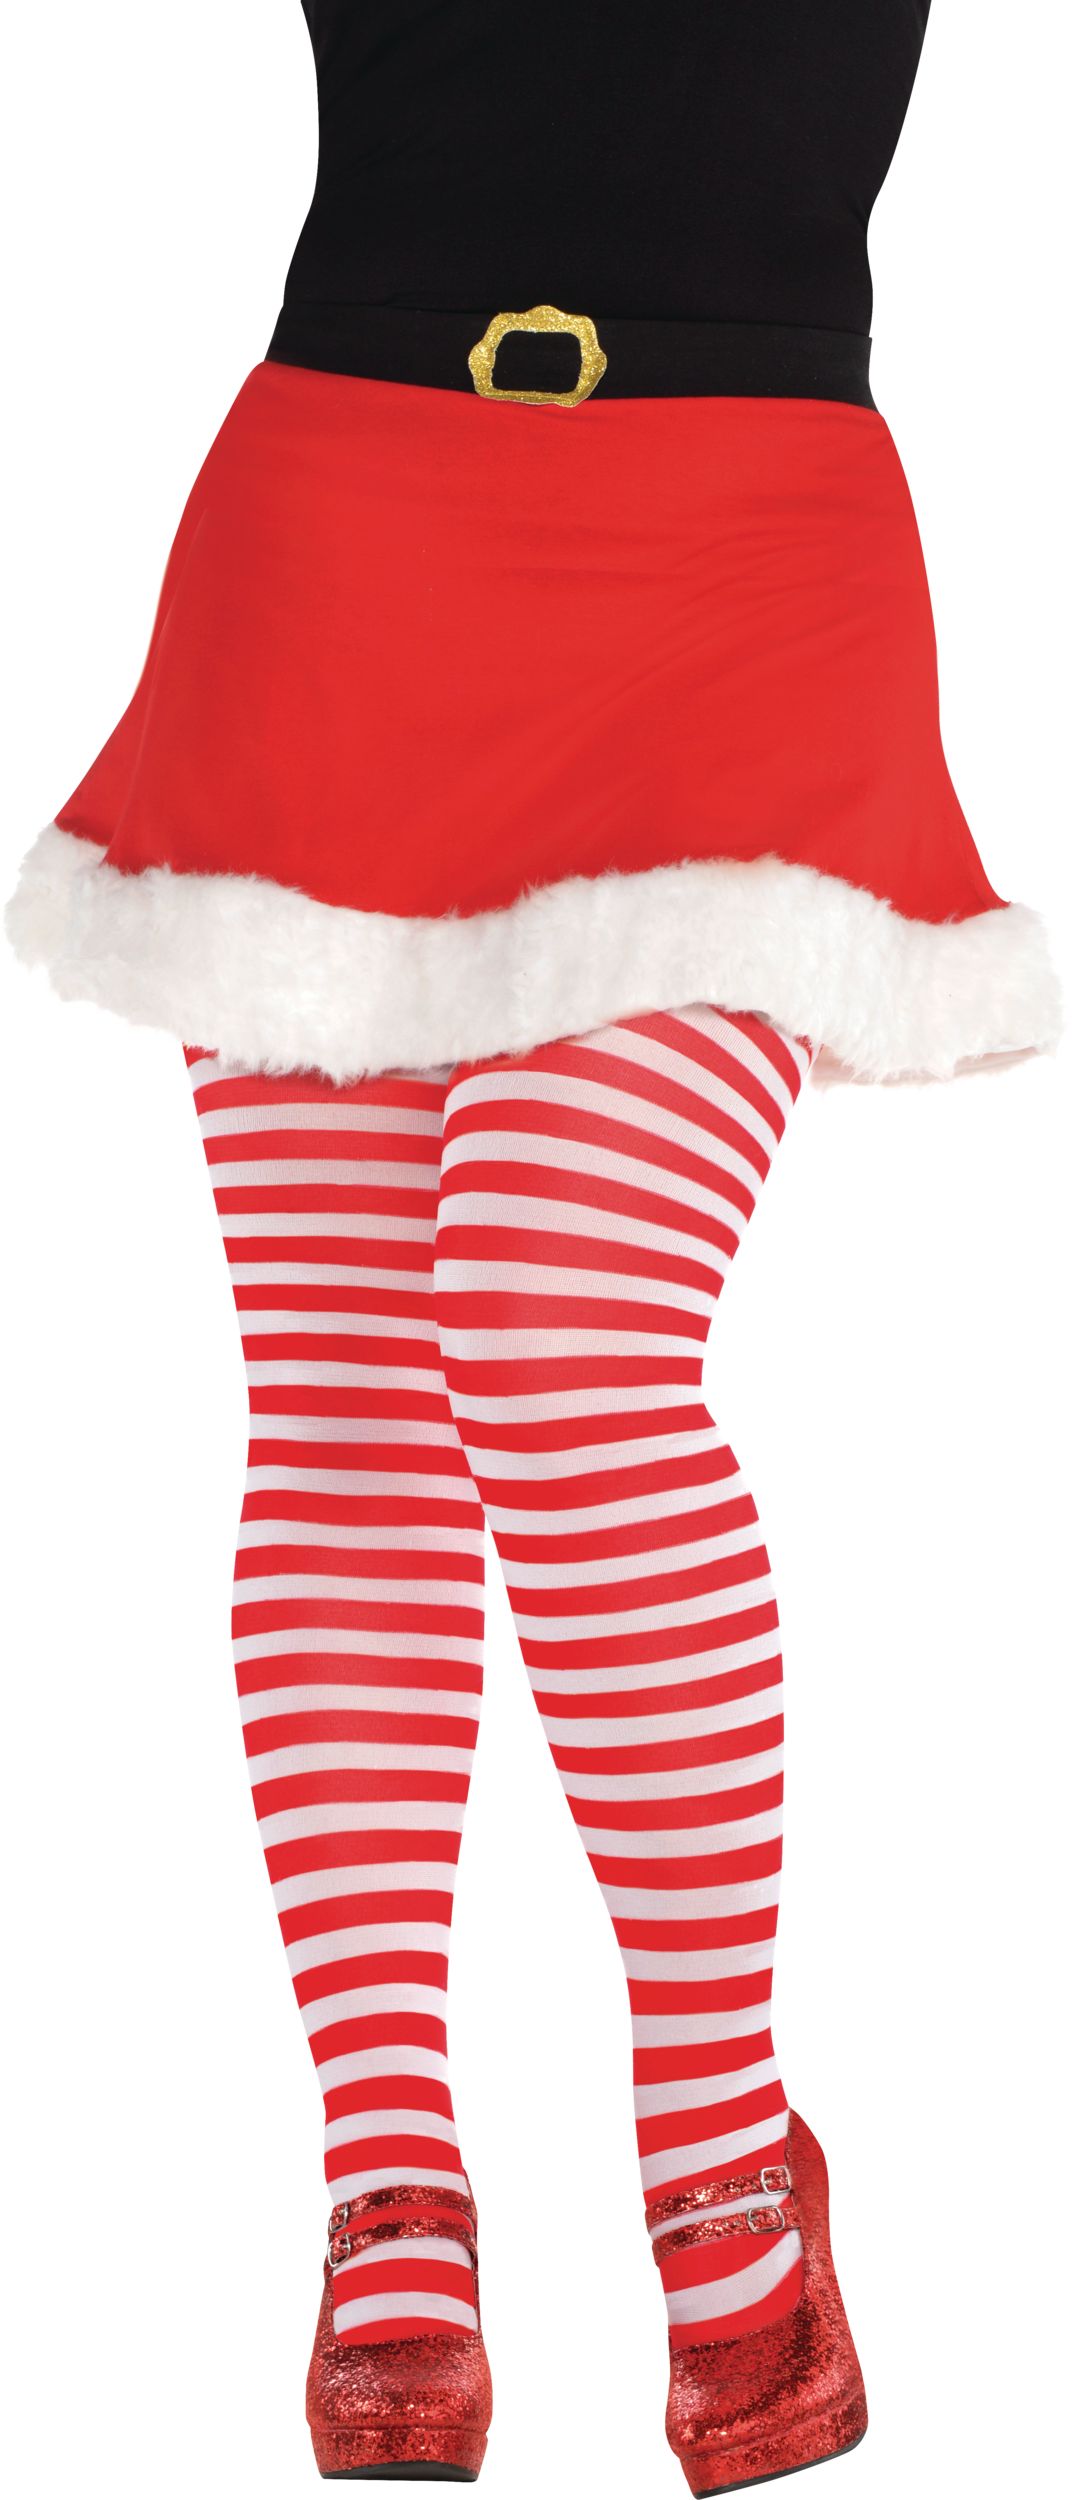 Women's Red And White Striped Leggings & Tights